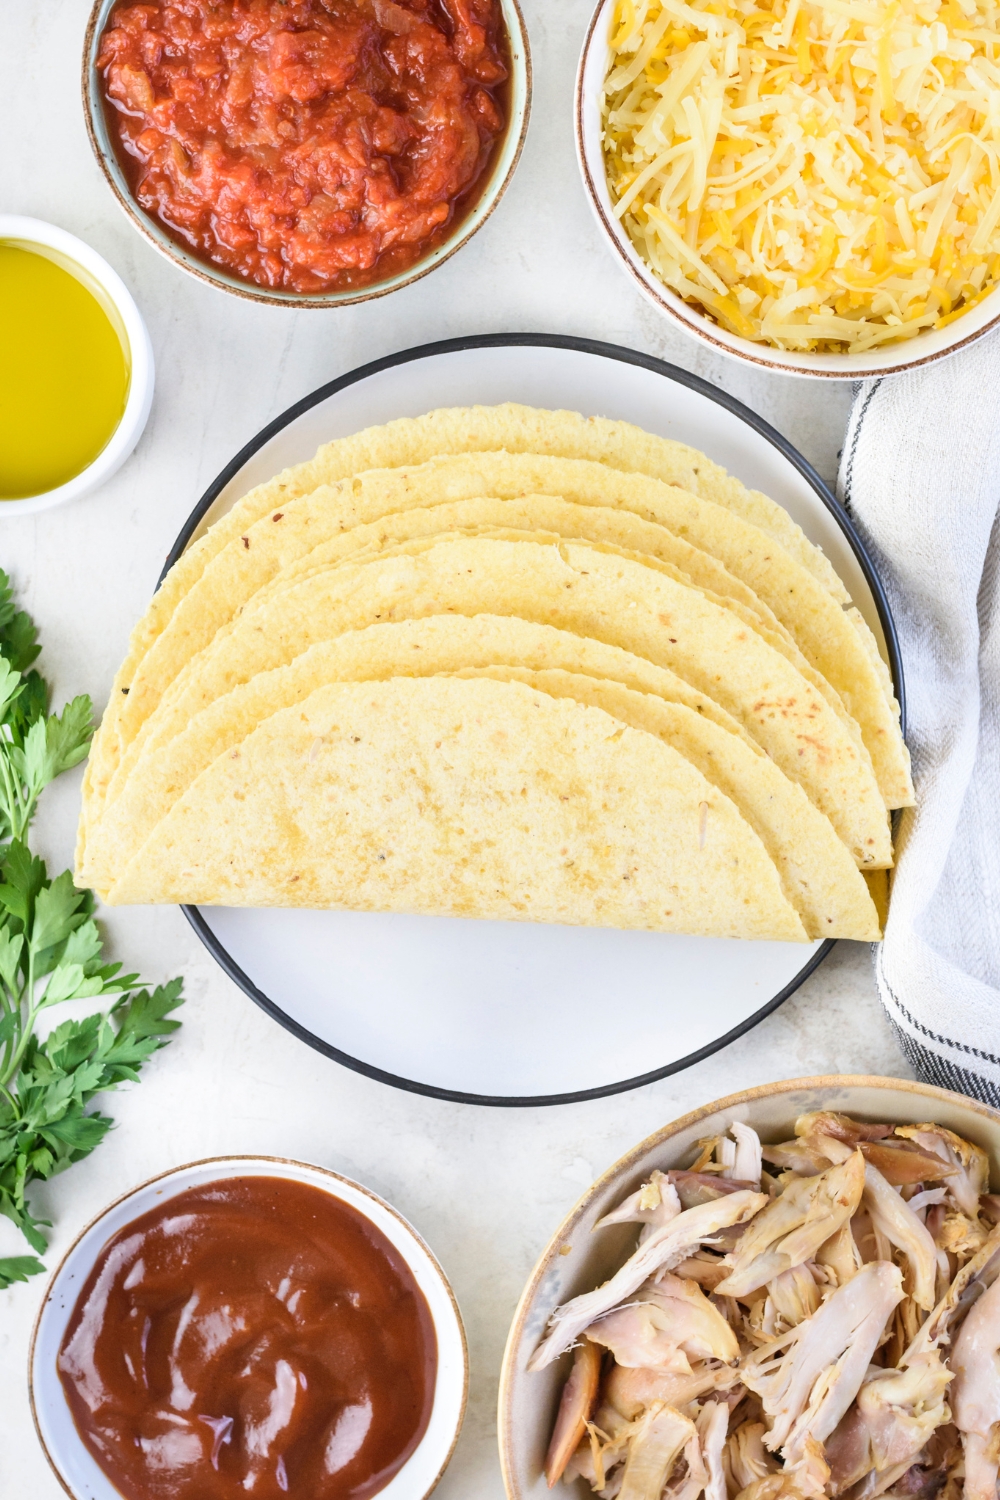 An assortment of ingredients including a plate of corn tortillas and bowls of barbecue sauce, shredded chicken, salsa, shredded cheese, and oil.